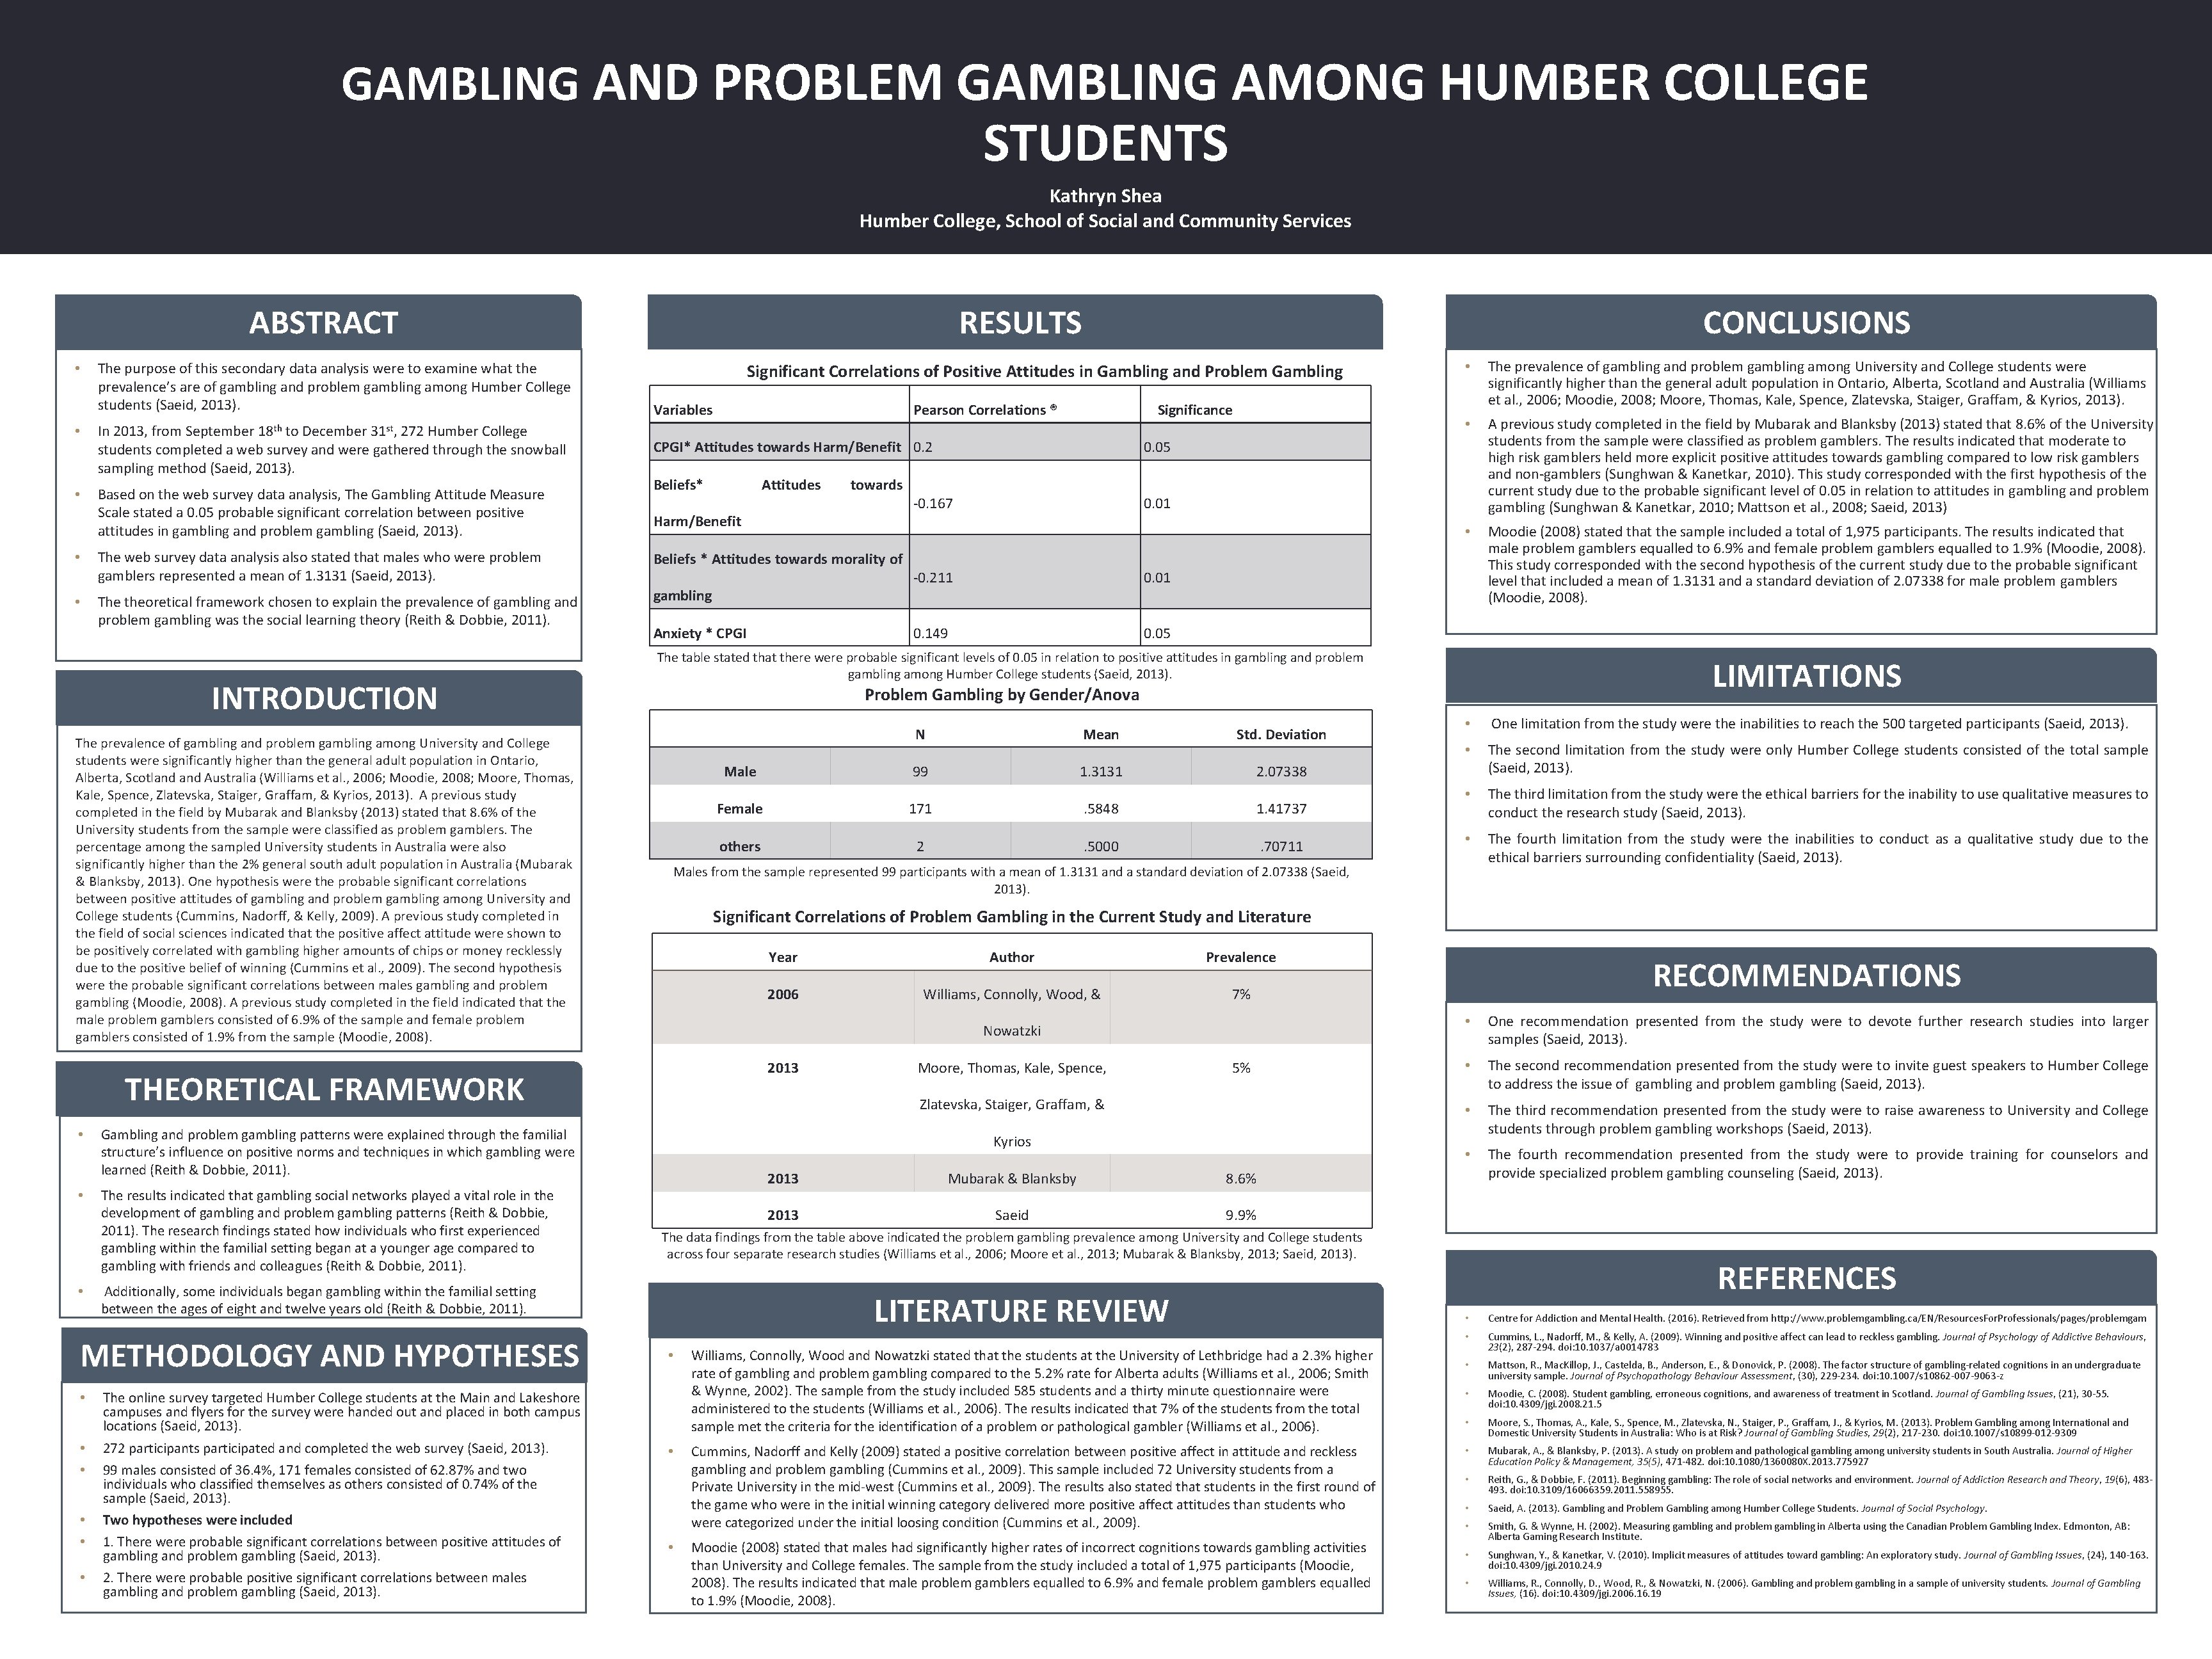 GAMBLING AND PROBLEM GAMBLING AMONG HUMBER COLLEGE STUDENTS Kathryn Shea Humber College, School of